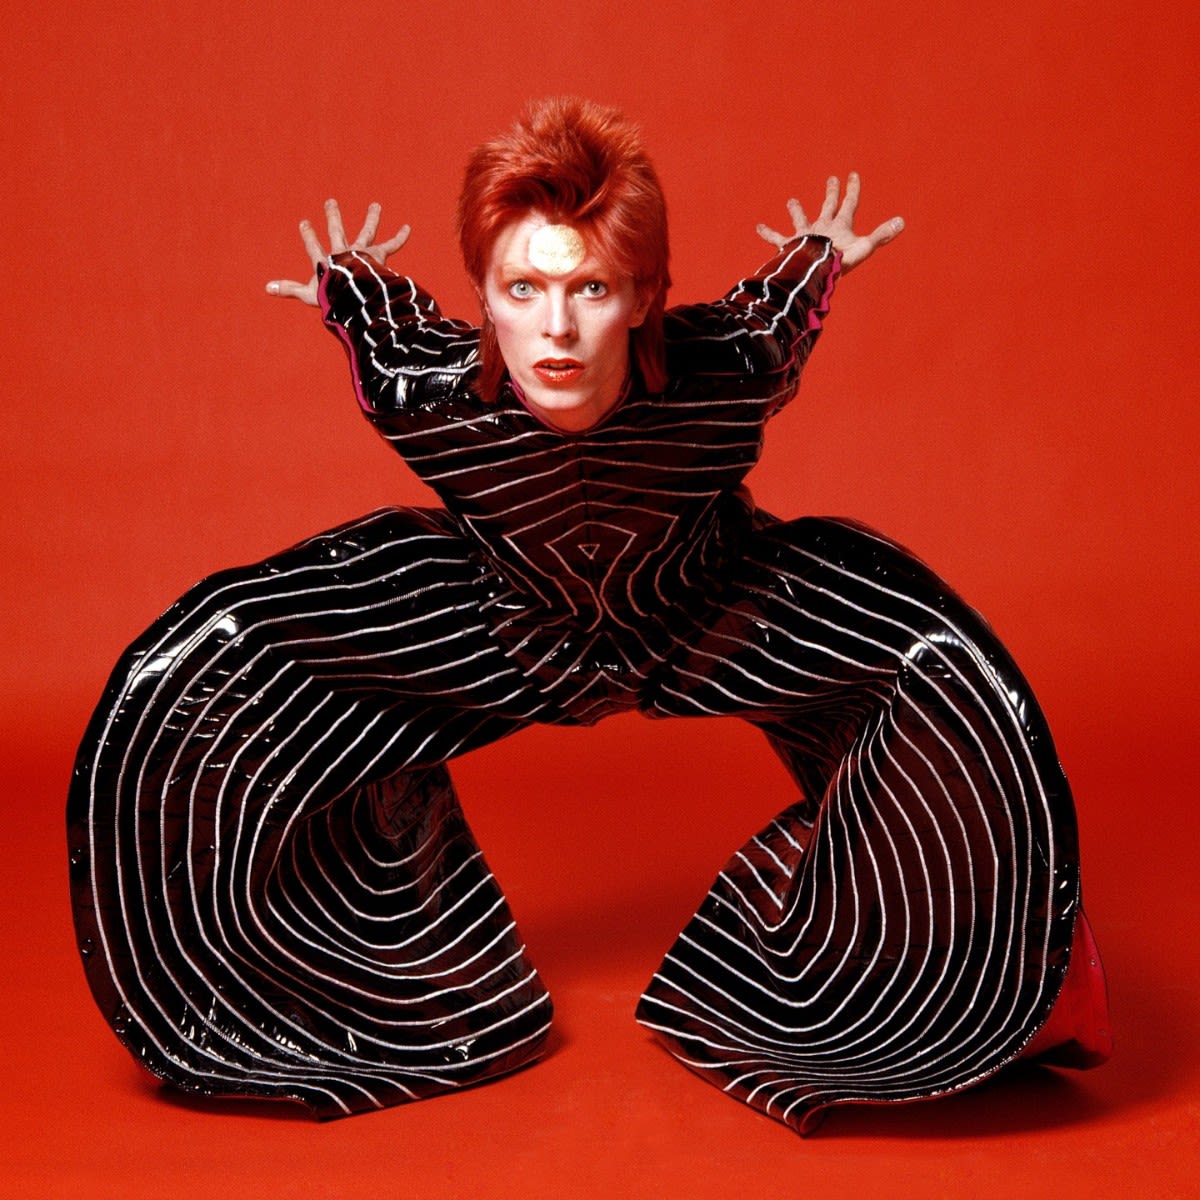 One of the most influential artists of the 20thC ⚡ This week marks the birthday and five years since DavidBowie's death. Striped bodysuit from the 1973 Aladdin Sane tour by Kansai Yamamoto. https://t.co/40an1GfObG 📸 Masayoshi Sukita © Sukita / The David Bowie Archive 2012